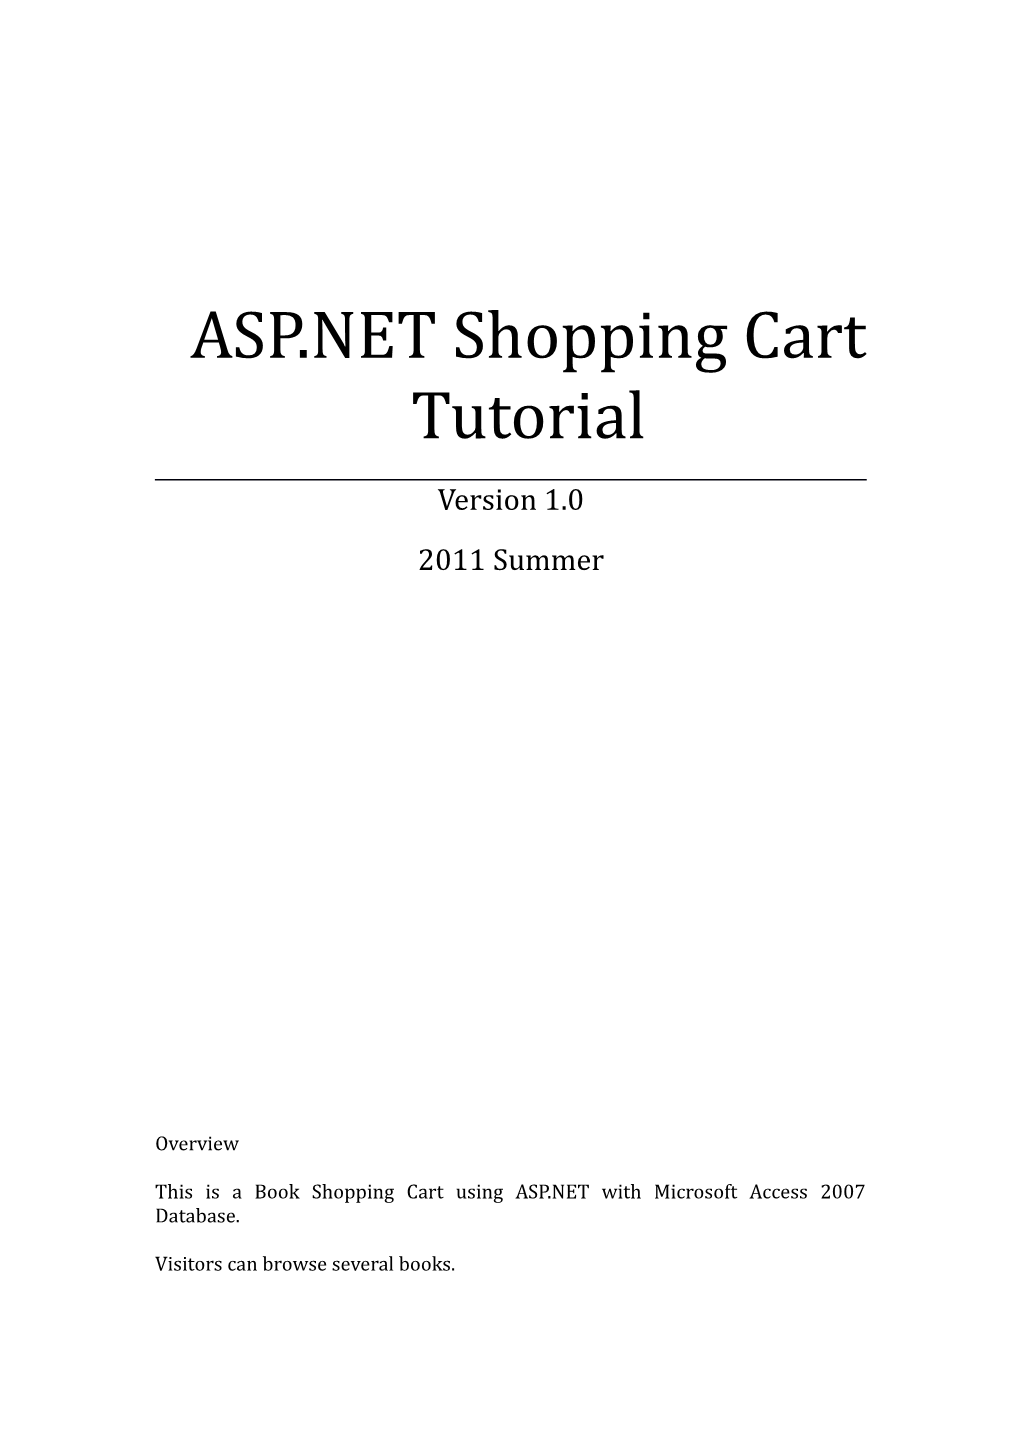 This Is a Book Shopping Cart Using ASP.NET with Microsoft Access 2007 Database